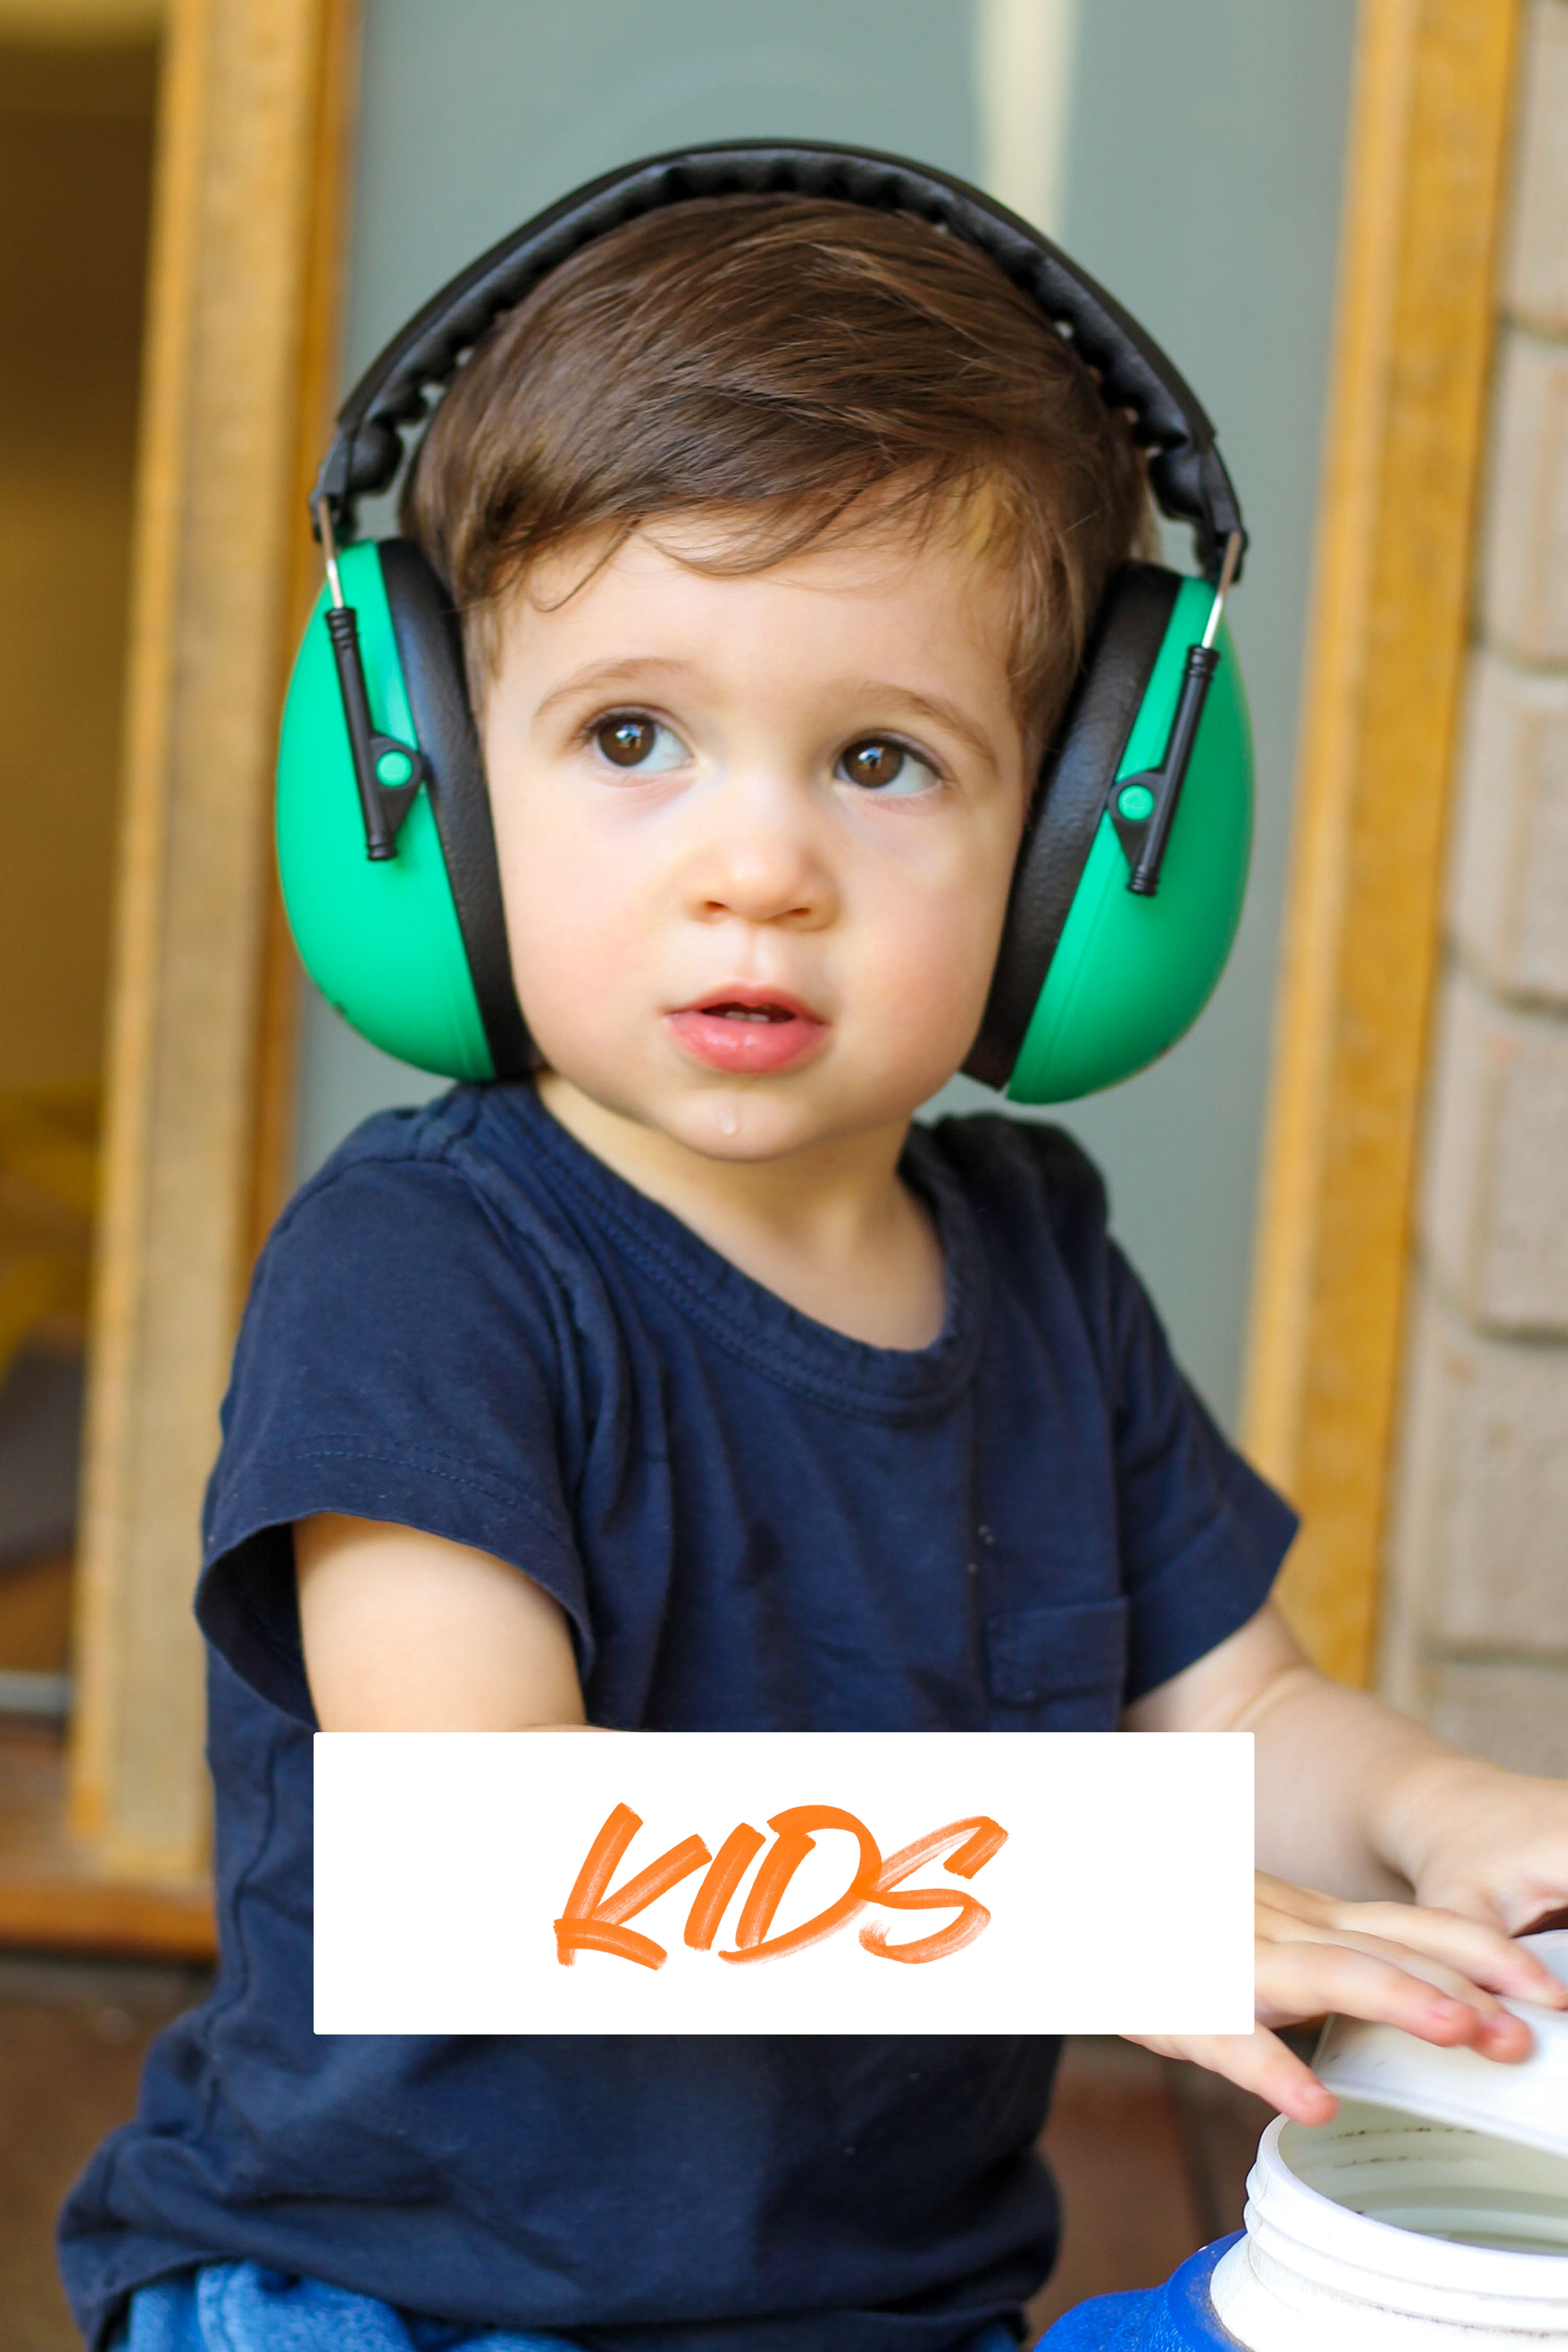 Child Baby Hearing Protection Safety Ear Muffs Kids Noise Cancelling Headphones 